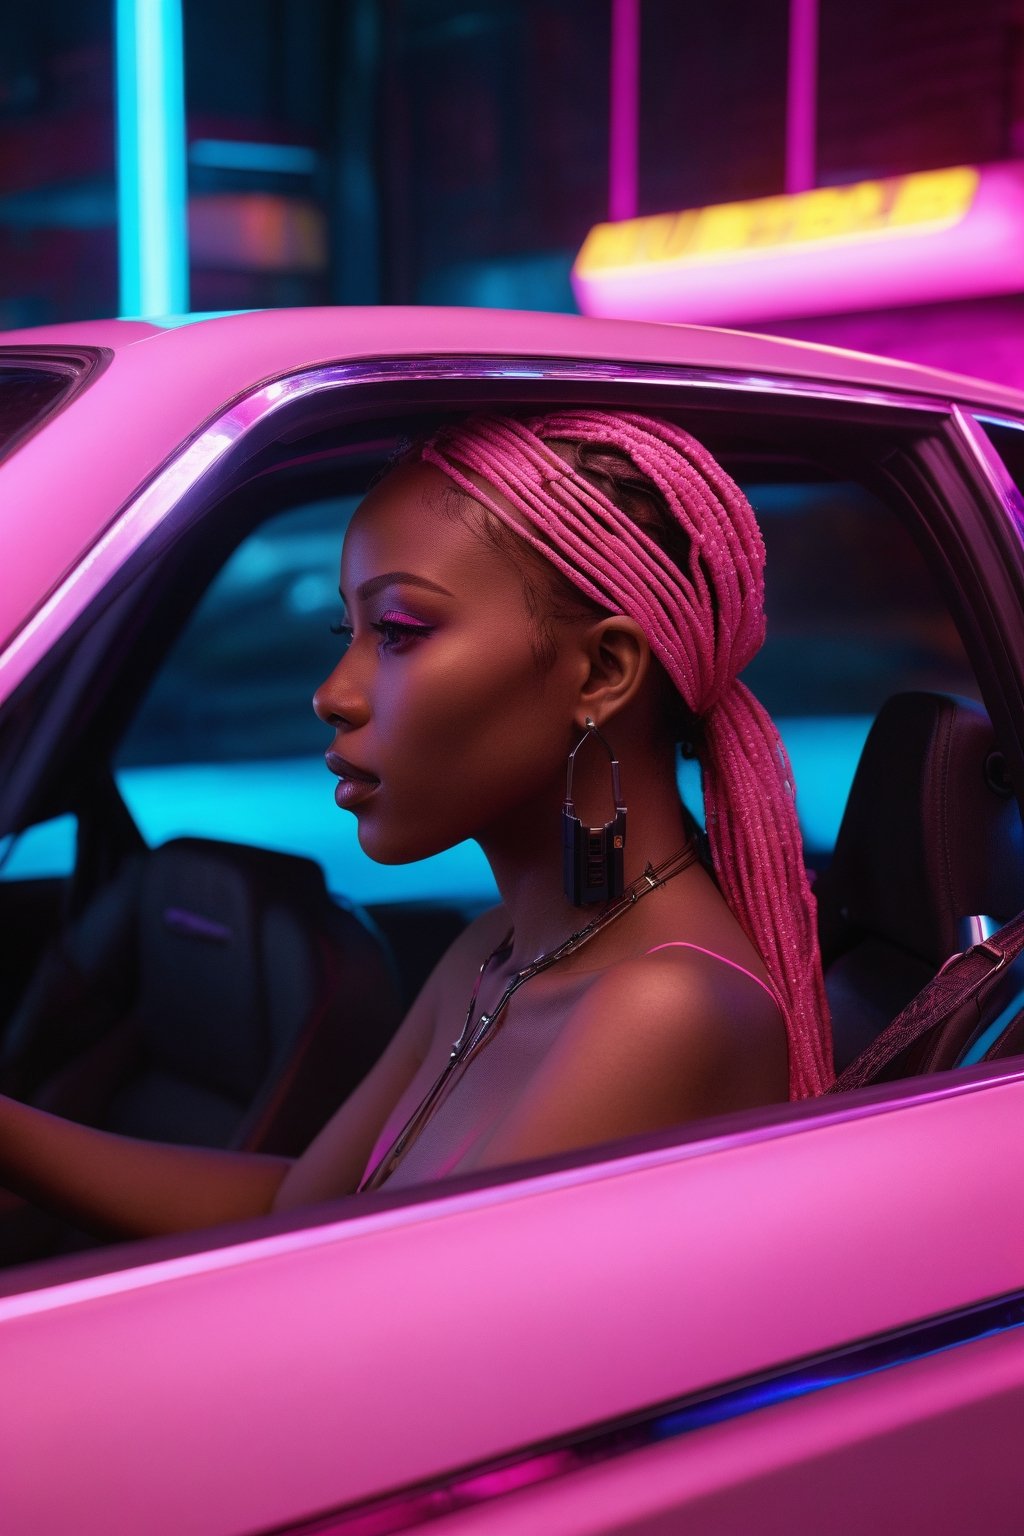 (ultra realistic,best quality),photorealistic,Extremely Realistic, in depth, cinematic light,hubgwomen,hubg_beauty_girl, african, nigerian

car, from side, , cyberpunk, neon lights, pink theme, indoors, transparent

intricate background, realism,realistic,raw,analog,portrait,photorealistic, 8k